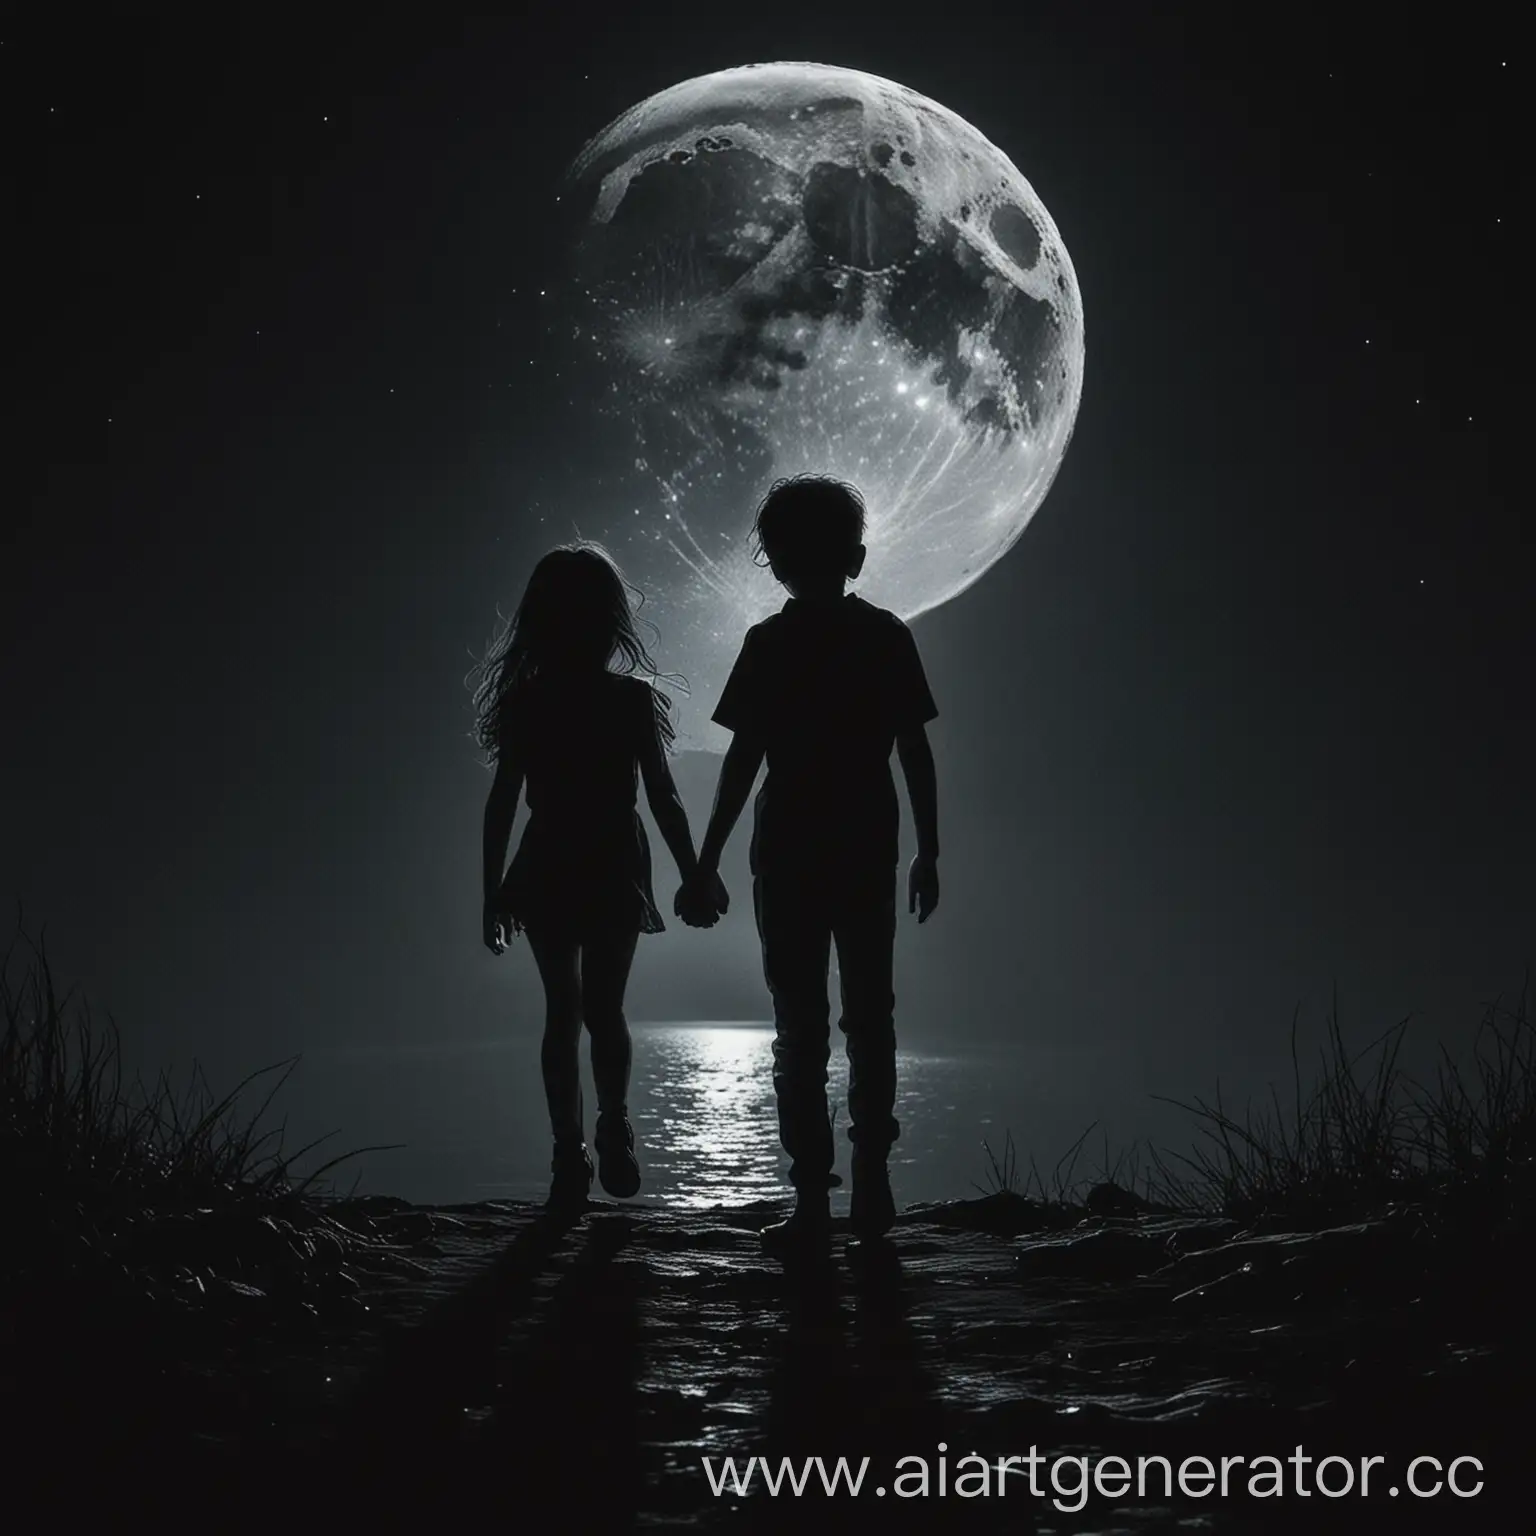 Boy-and-Girl-Silhouetted-Against-Moonlit-Night-Sky